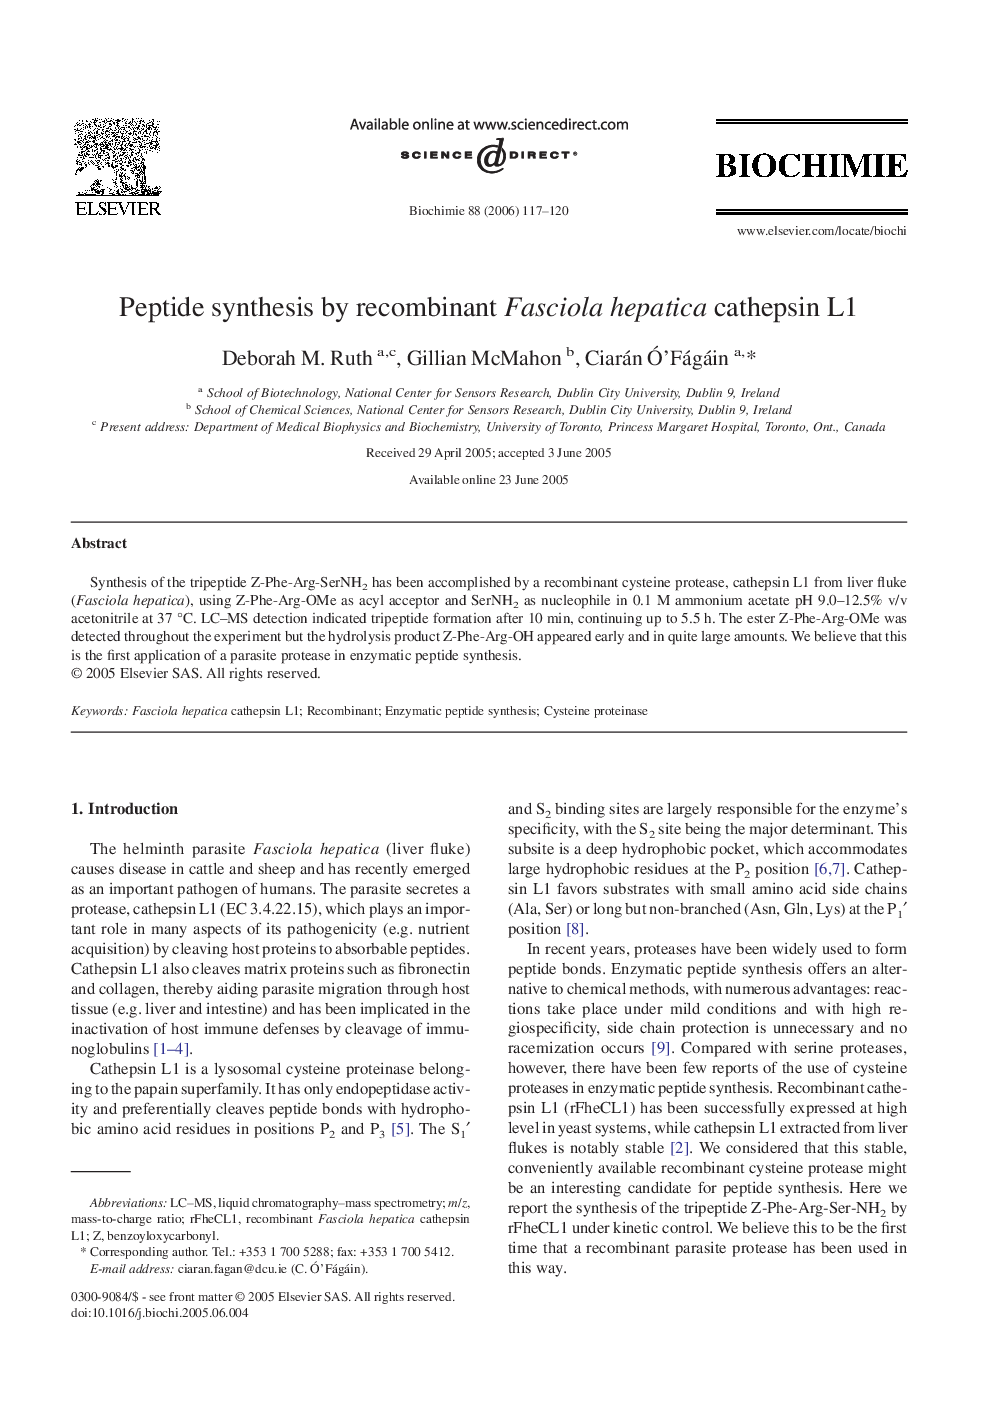 Peptide synthesis by recombinant Fasciola hepatica cathepsin L1